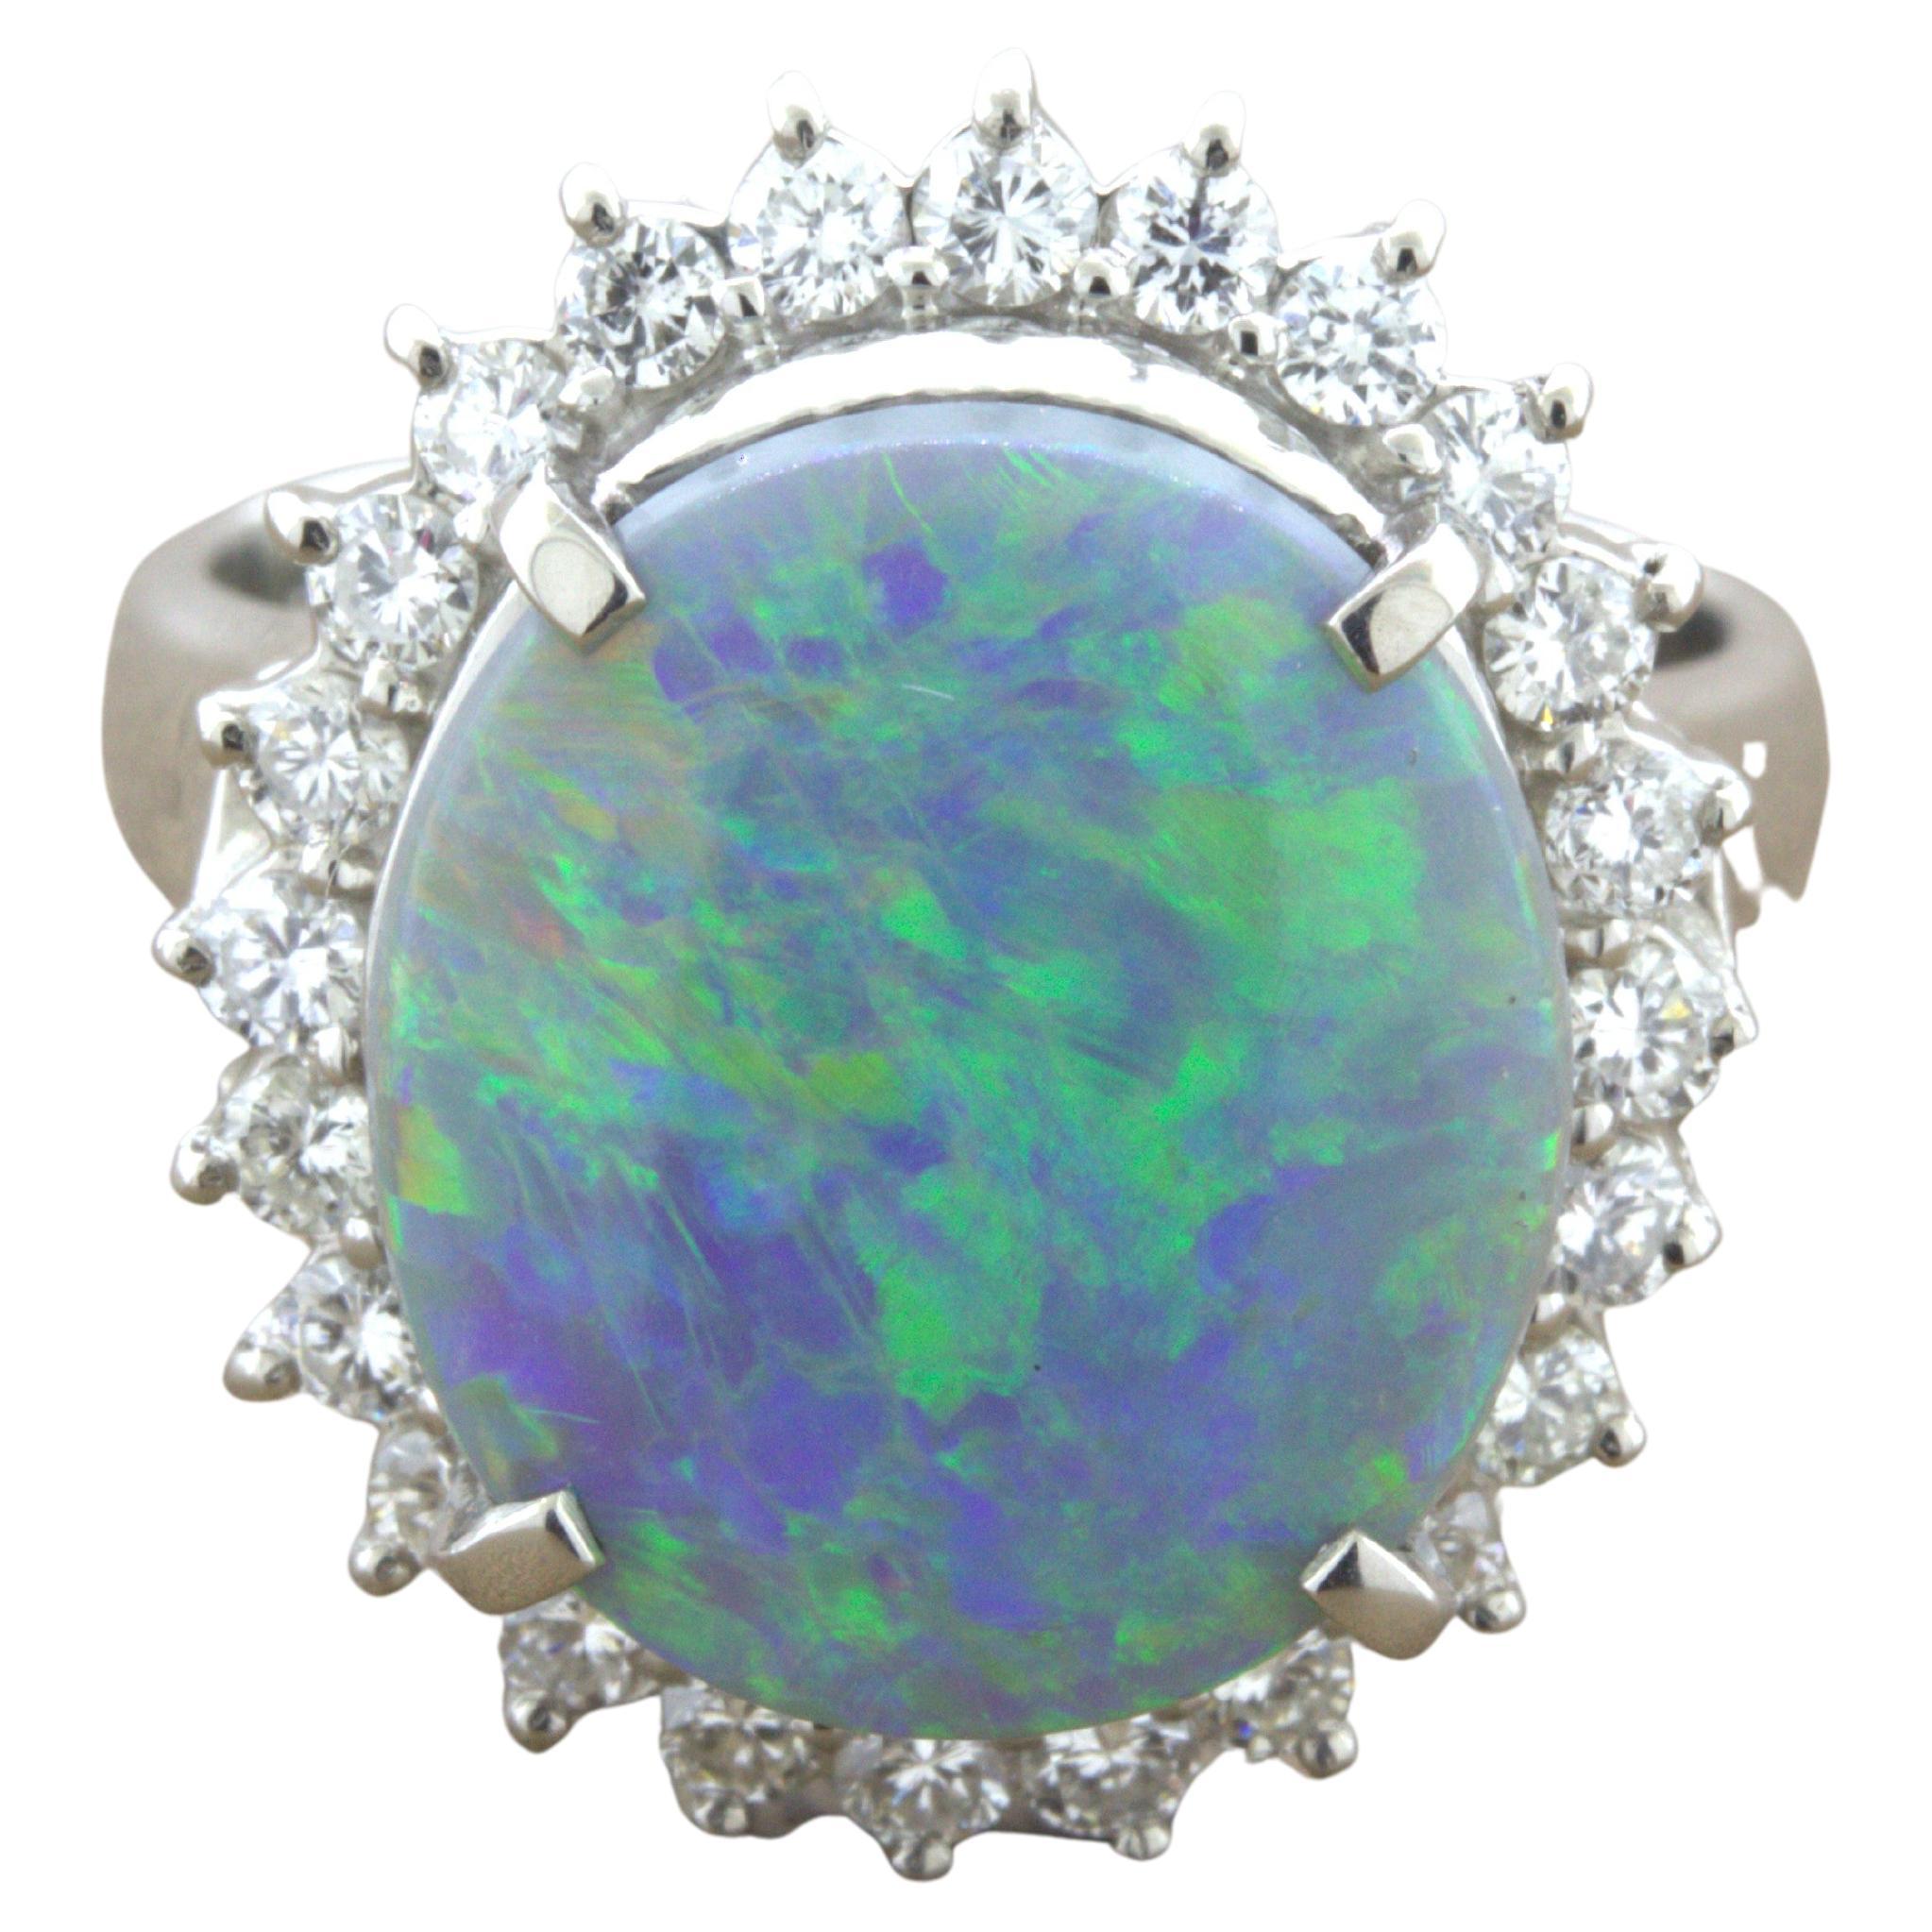 Are opal engagement rings a good idea?